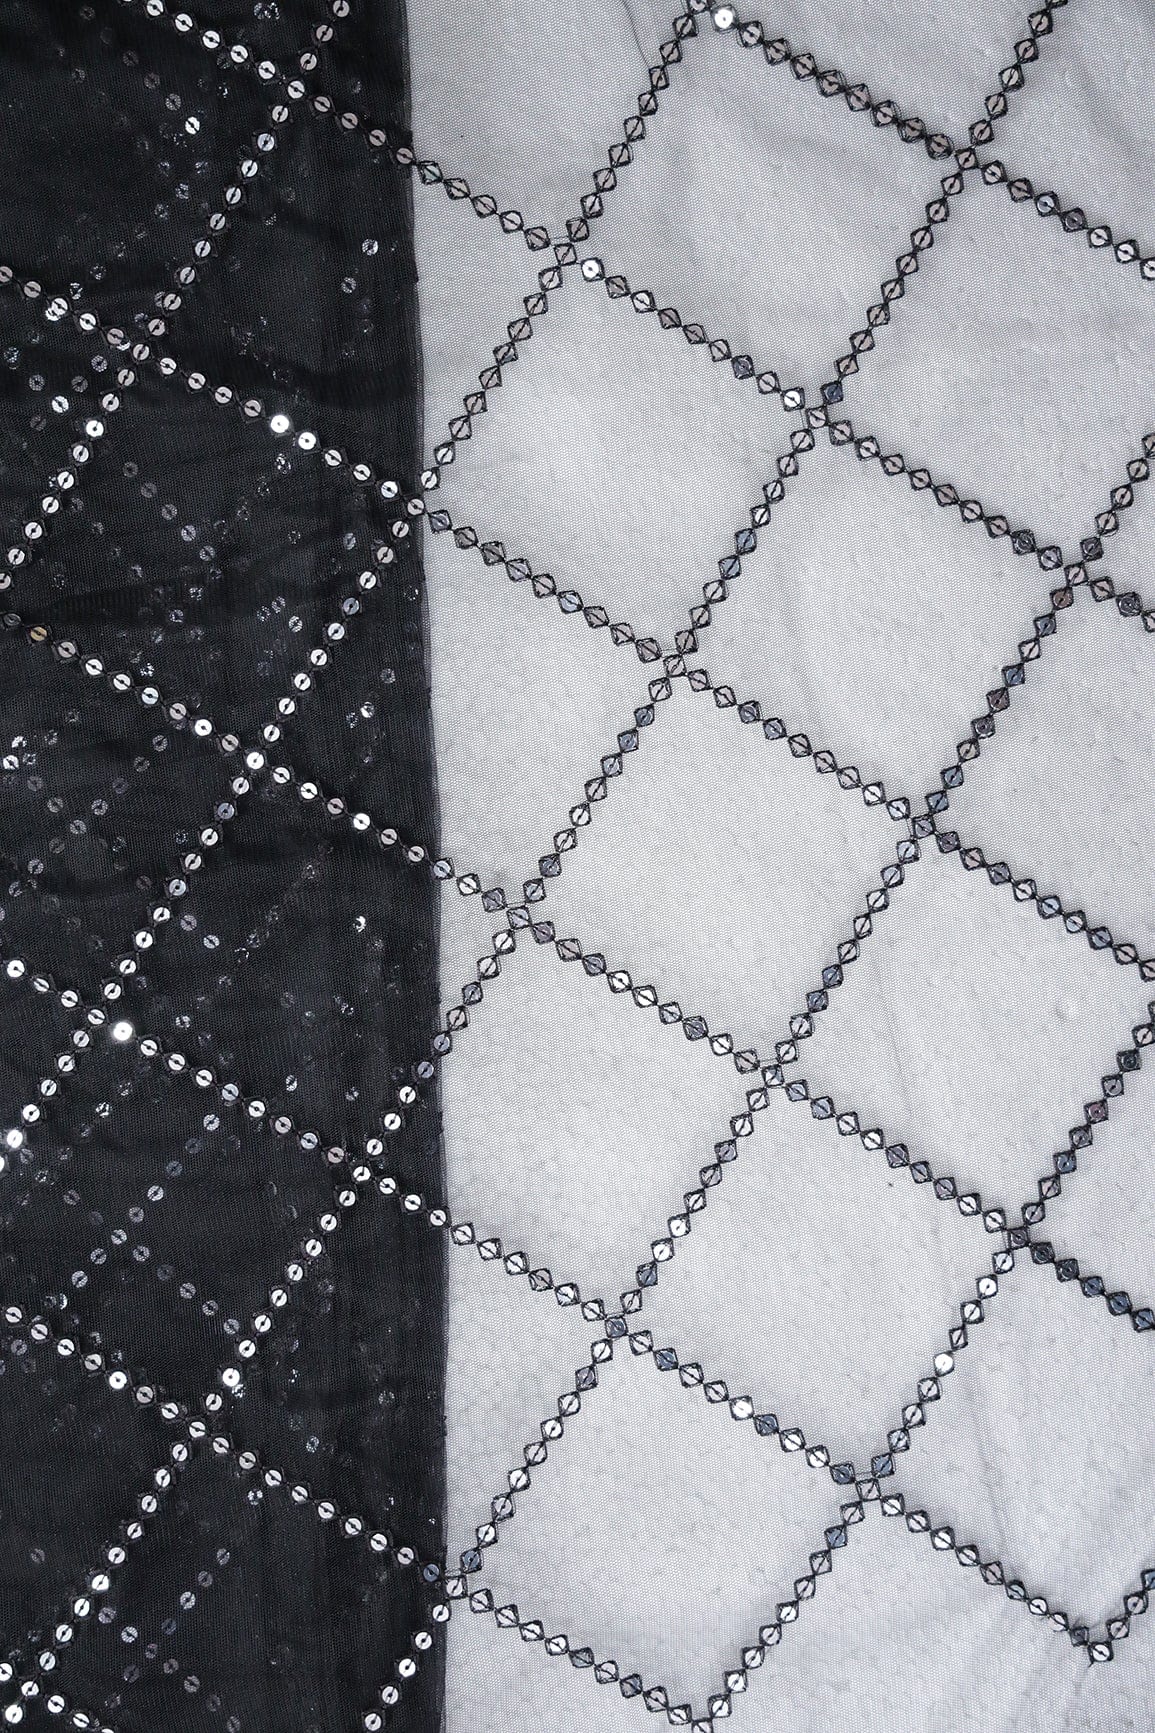 doeraa Embroidery Fabrics Silver Sequins With Thread Checks Embroidery Work On Black Soft Net Fabric